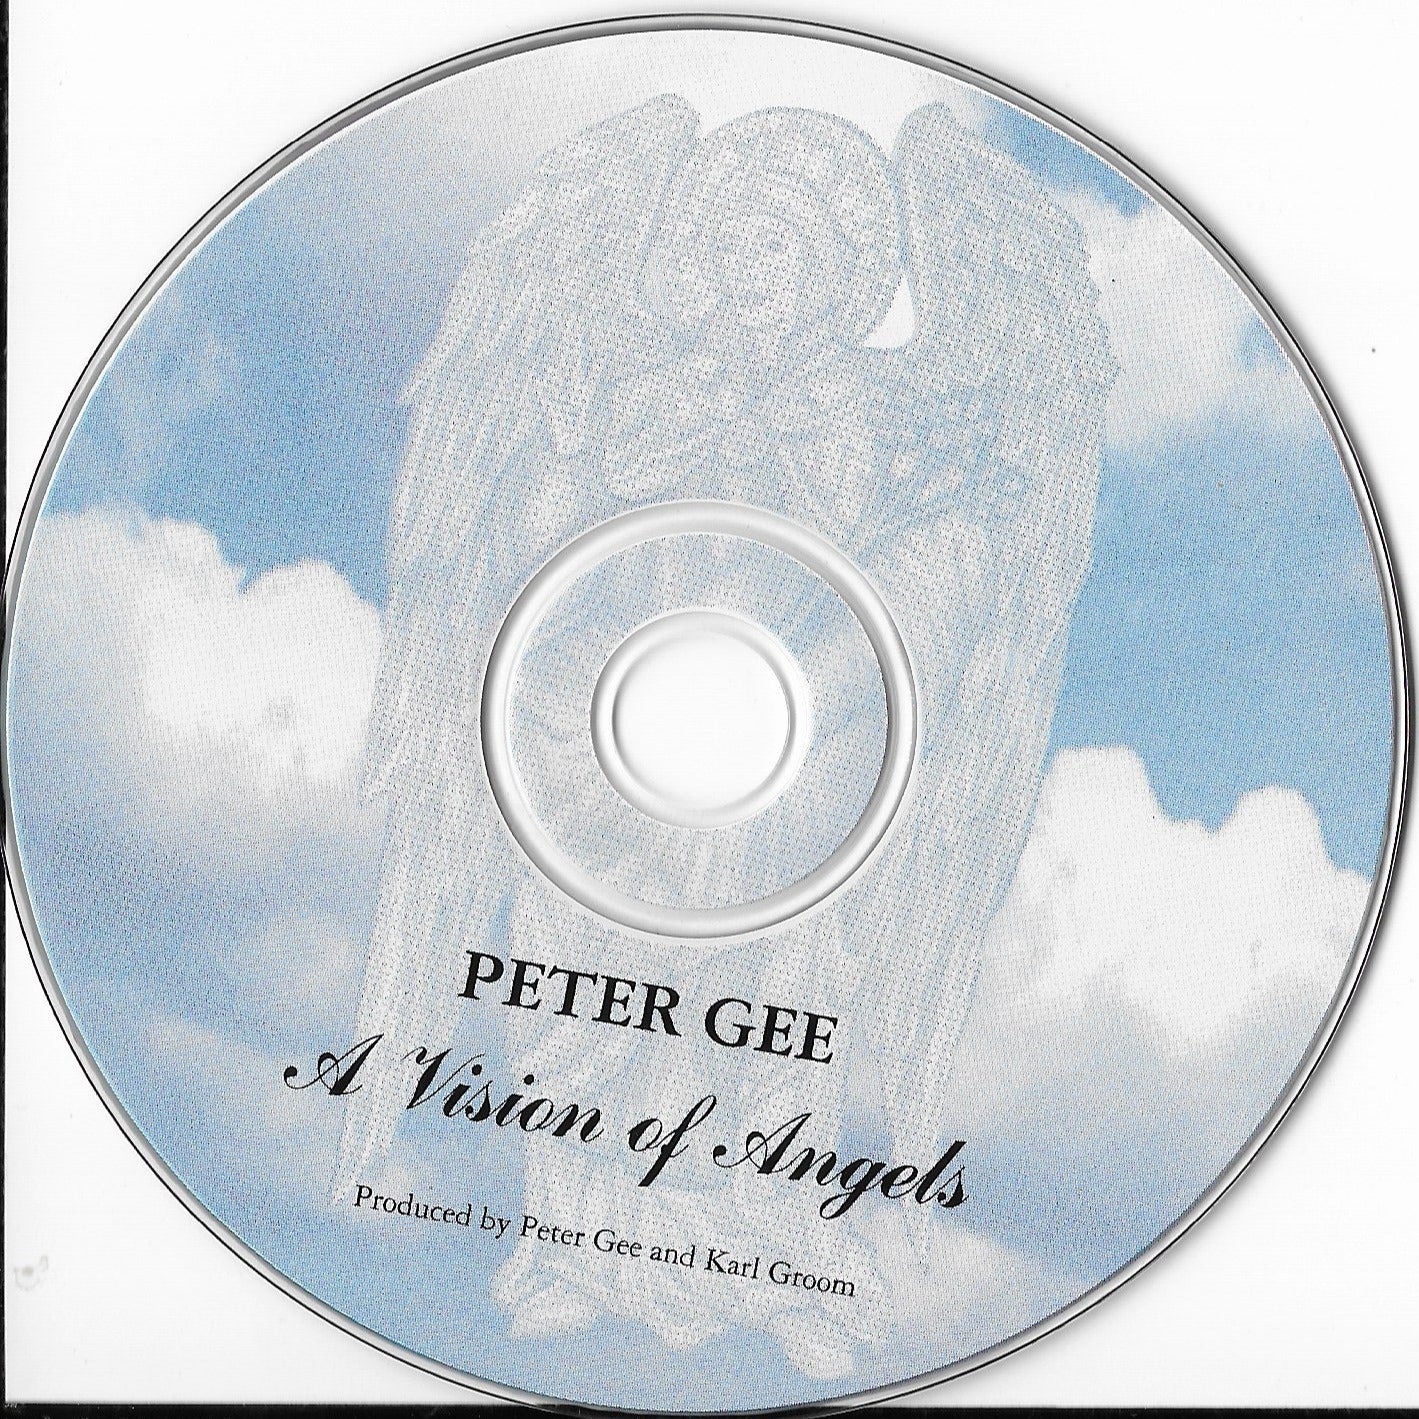 PETER GEE - A Vision Of Angels